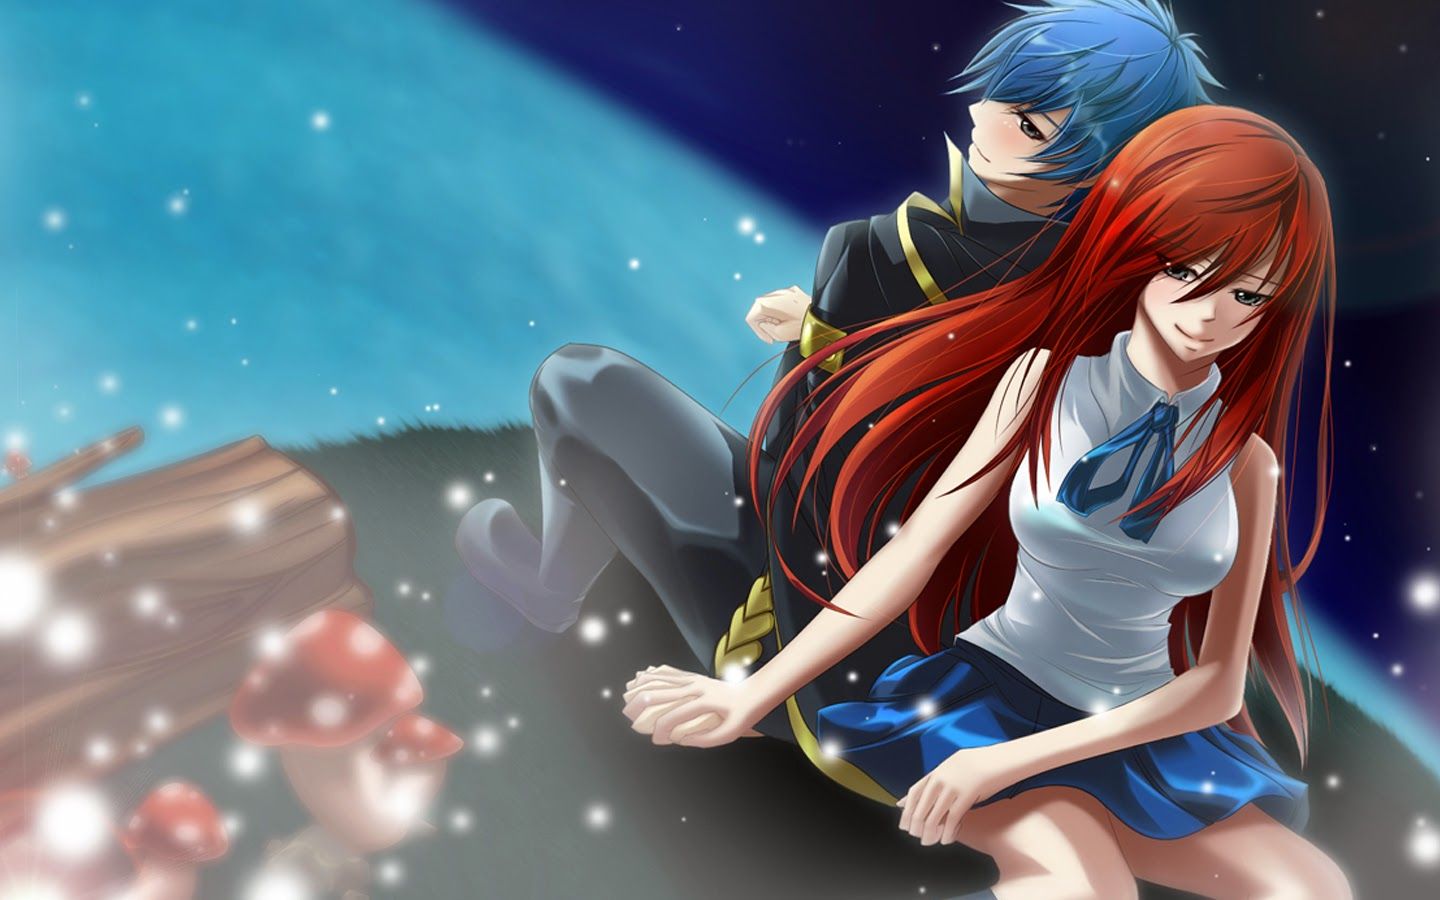 Free download Sweet Couple Holding Hands Anime Fairy Tail HD Wallpaper a12 [1440x900] for your Desktop, Mobile & Tablet. Explore Anime Couple HD Wallpaper. Manga Wallpaper, Cool Anime Wallpaper